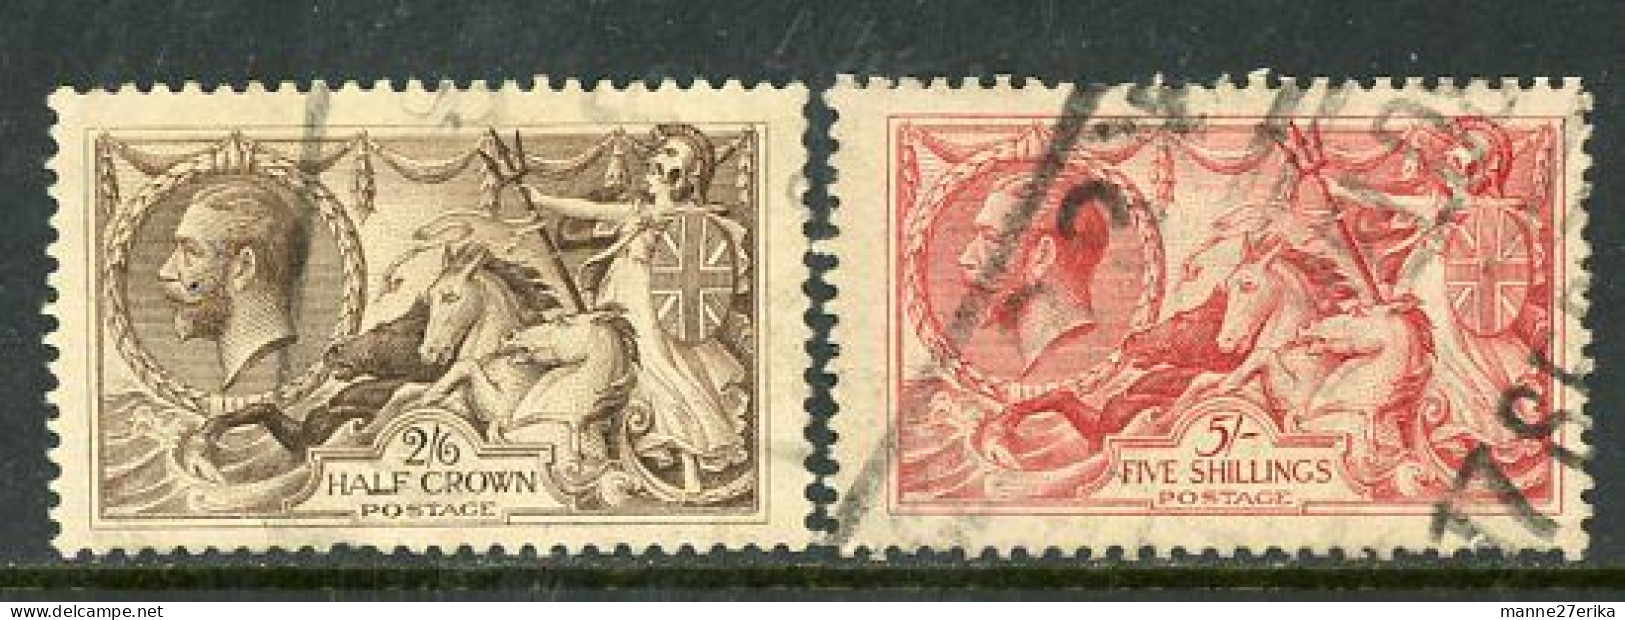 Great Britain USED 1919 - Used Stamps